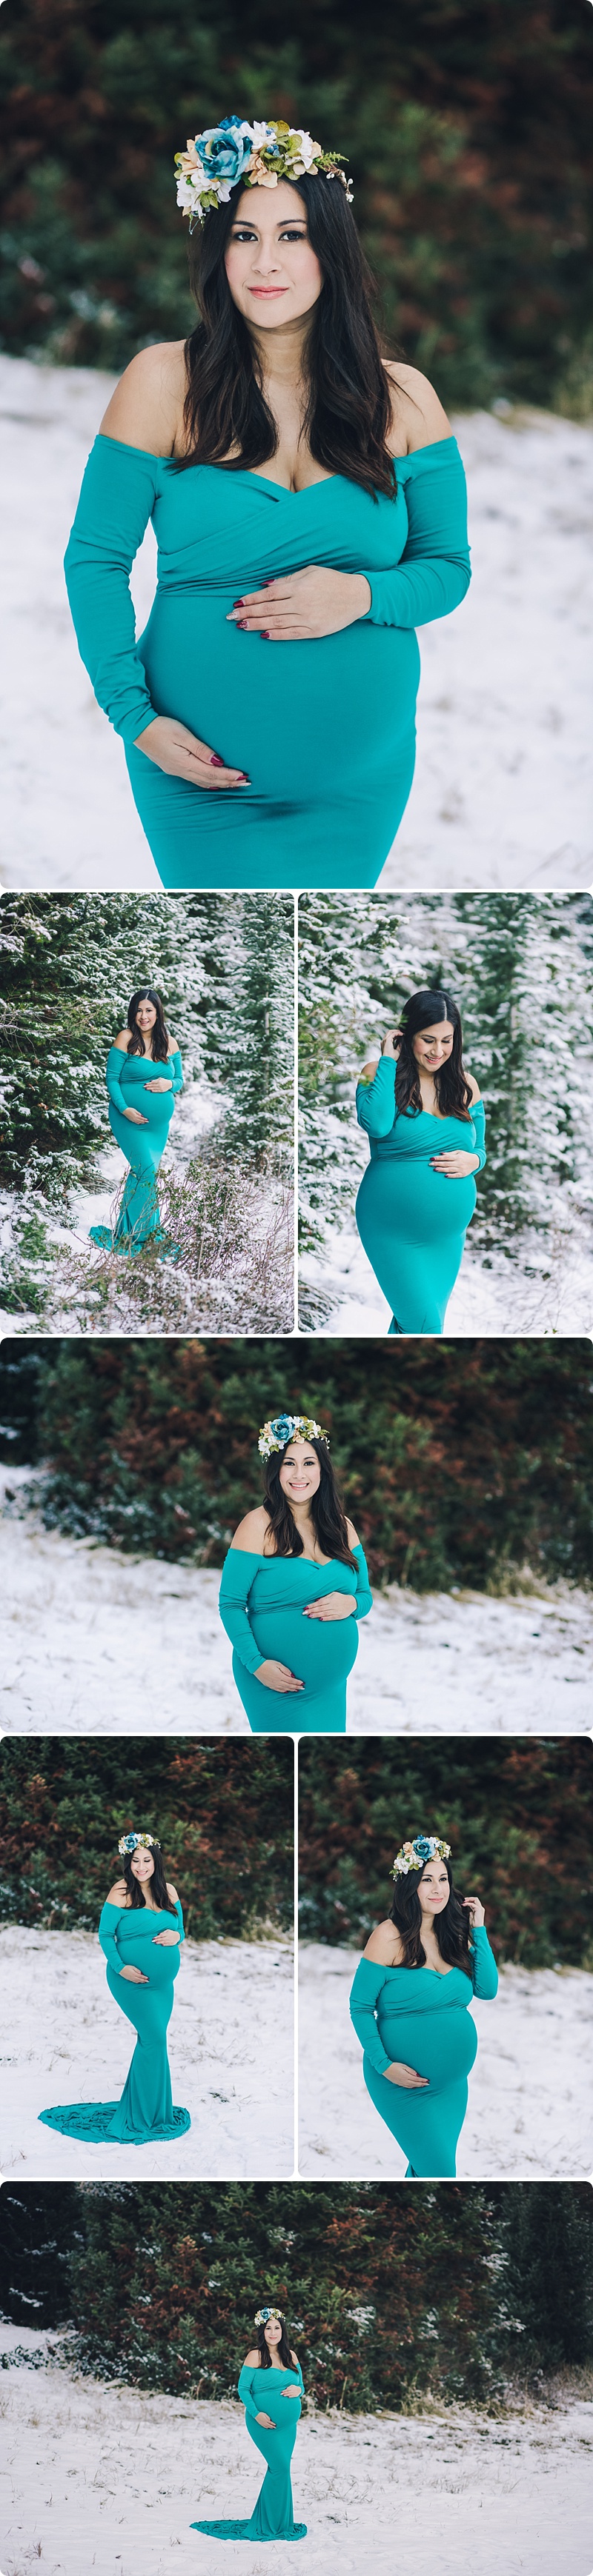 Big Cottonwood Canyon,Christmas,bloggers,holiday sessions,mommy blogger,snow maternity,snow session,